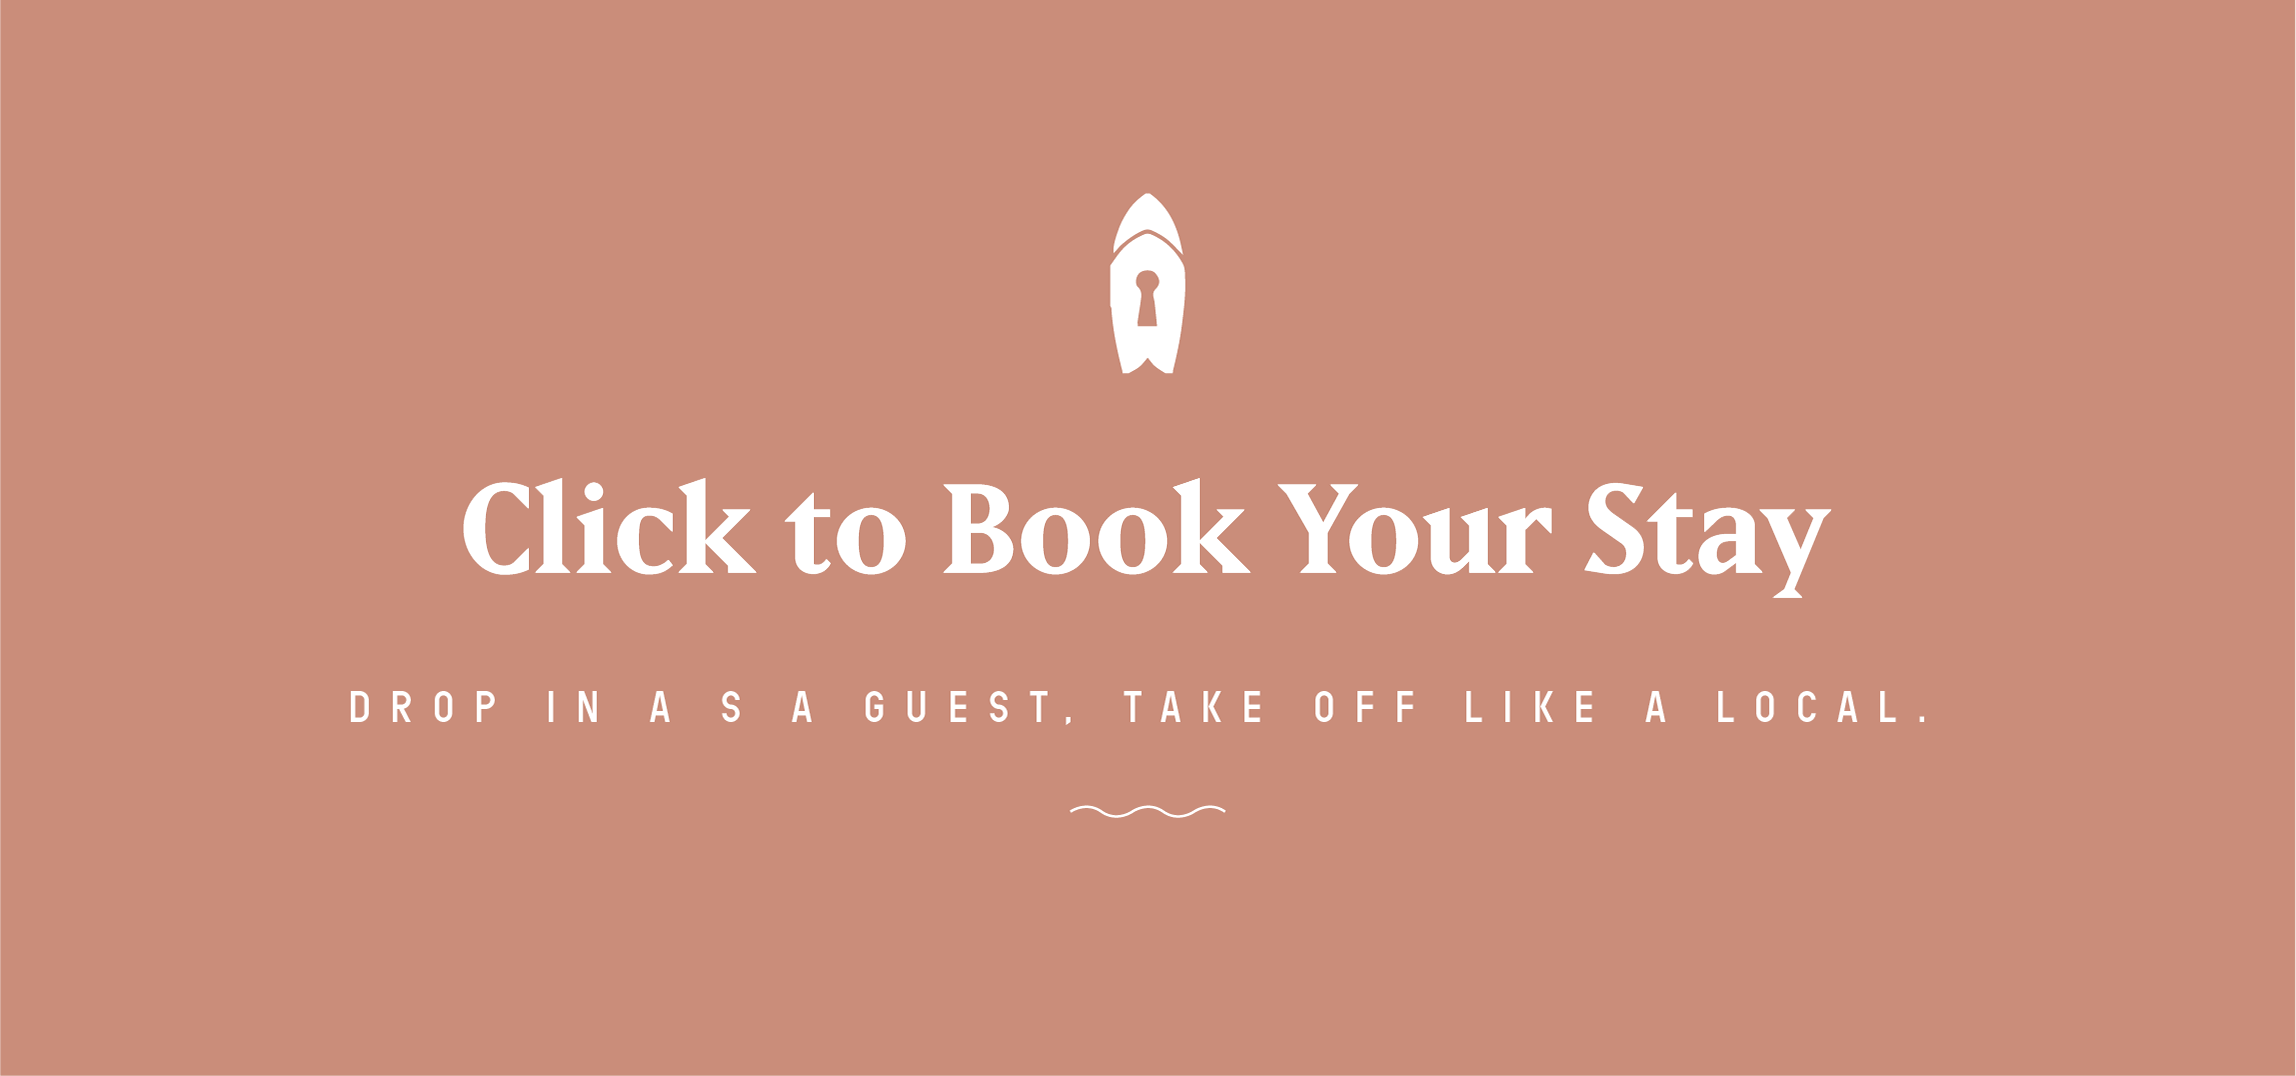 Click to Book your stay. Drop in as a guest, take off like a local.